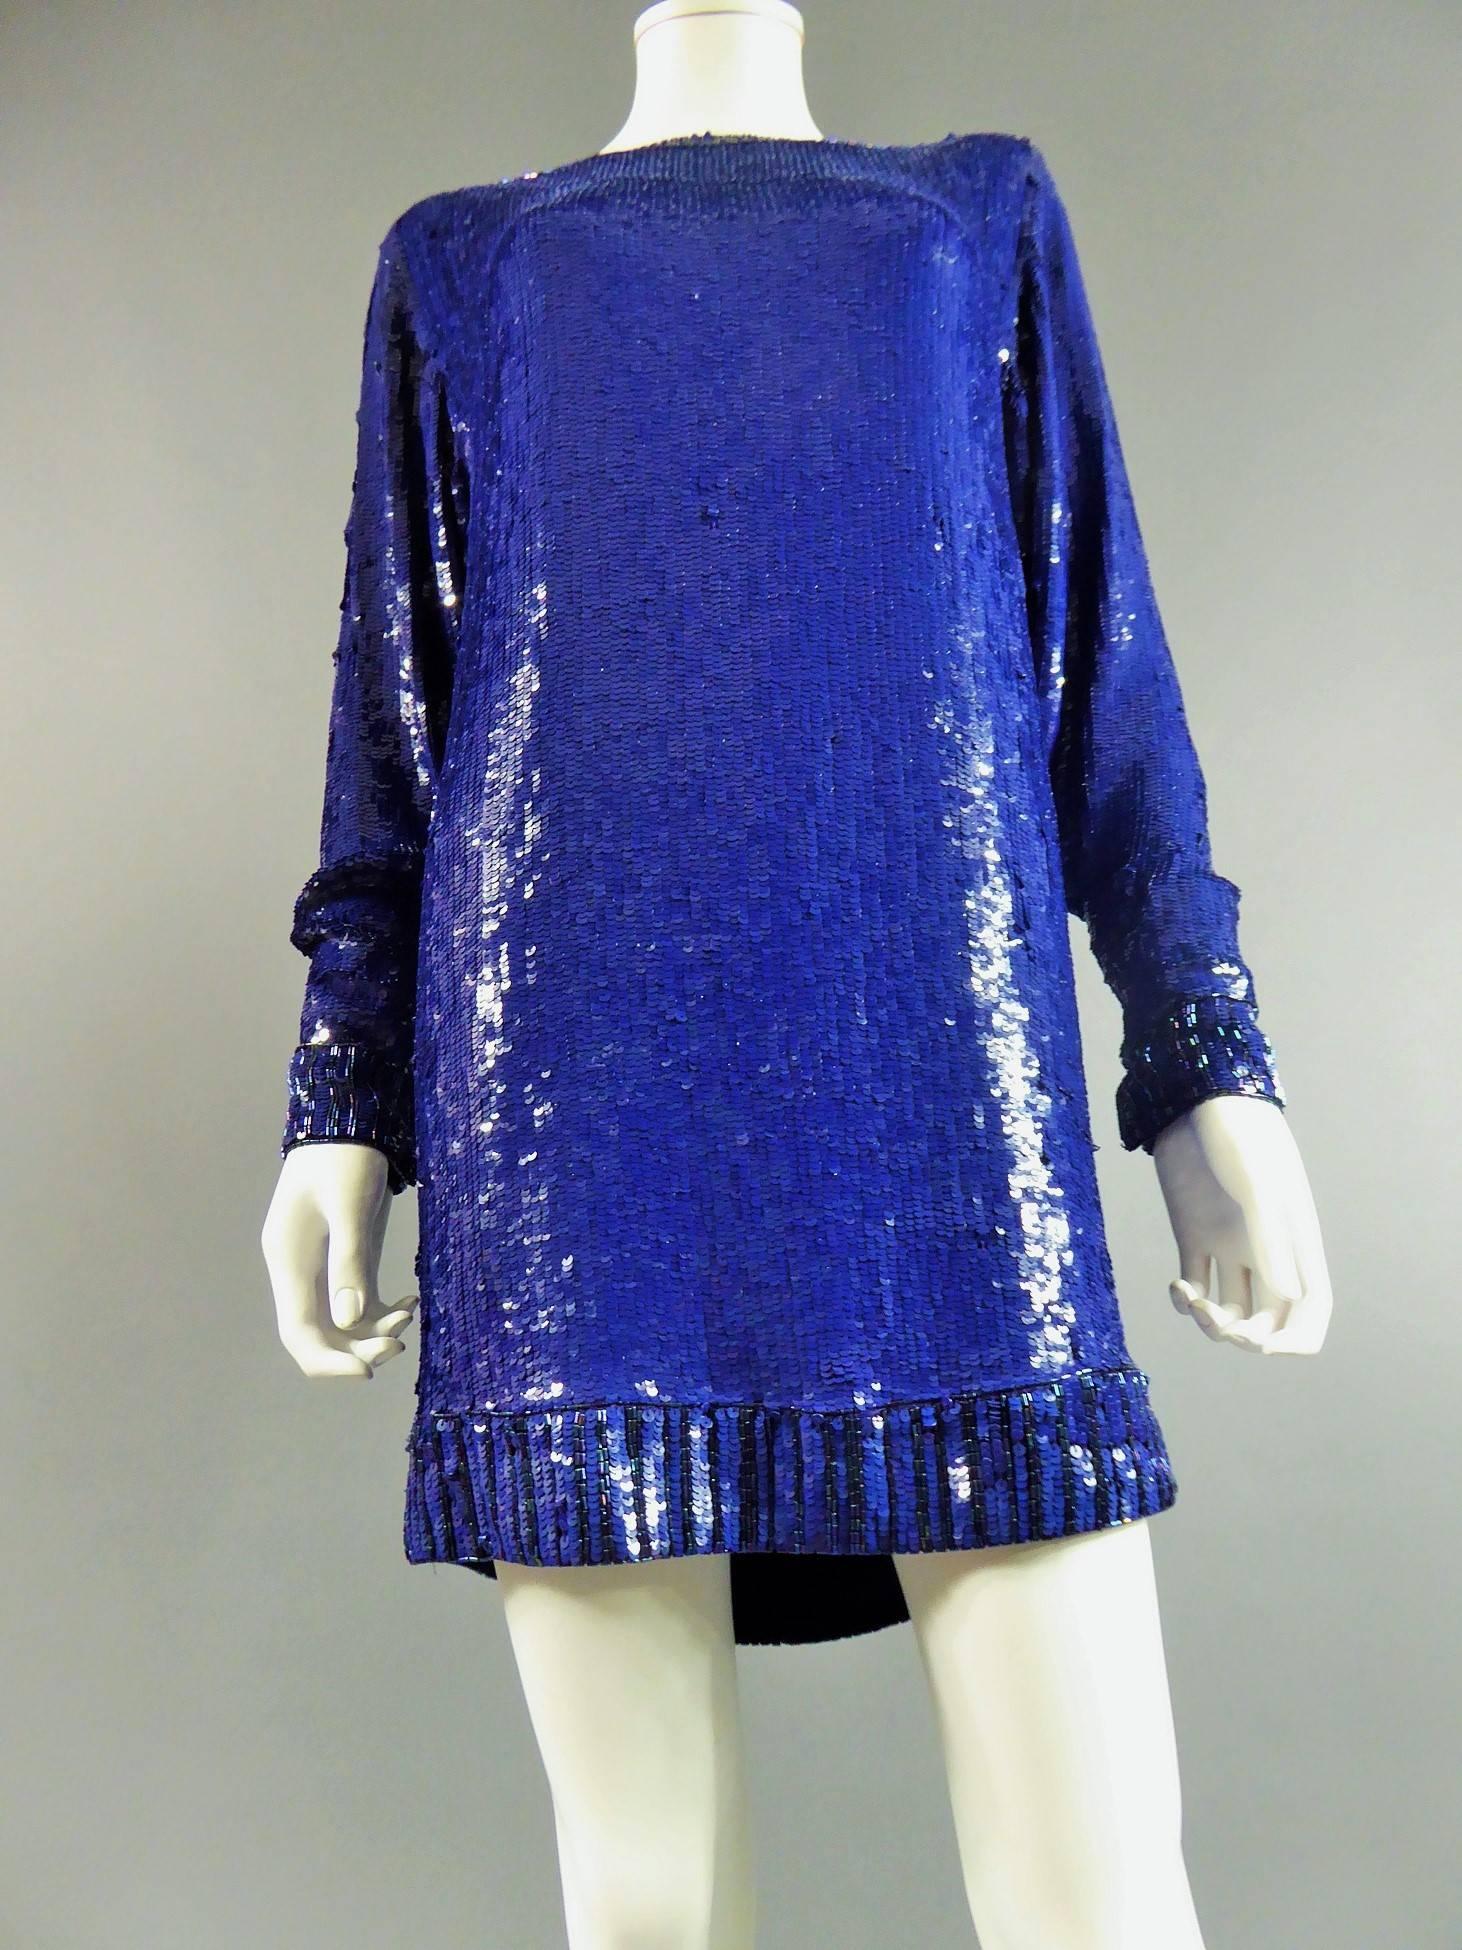 Circa 1980

France

Sweater or sweater dress by Saint Laurent Rive Gauche in majorelle blue color. Sweater dress covered with blue sequins. Collar, sleeves and bottom of the sweater decorated with round and blue tubular and seed beads. Sleeves